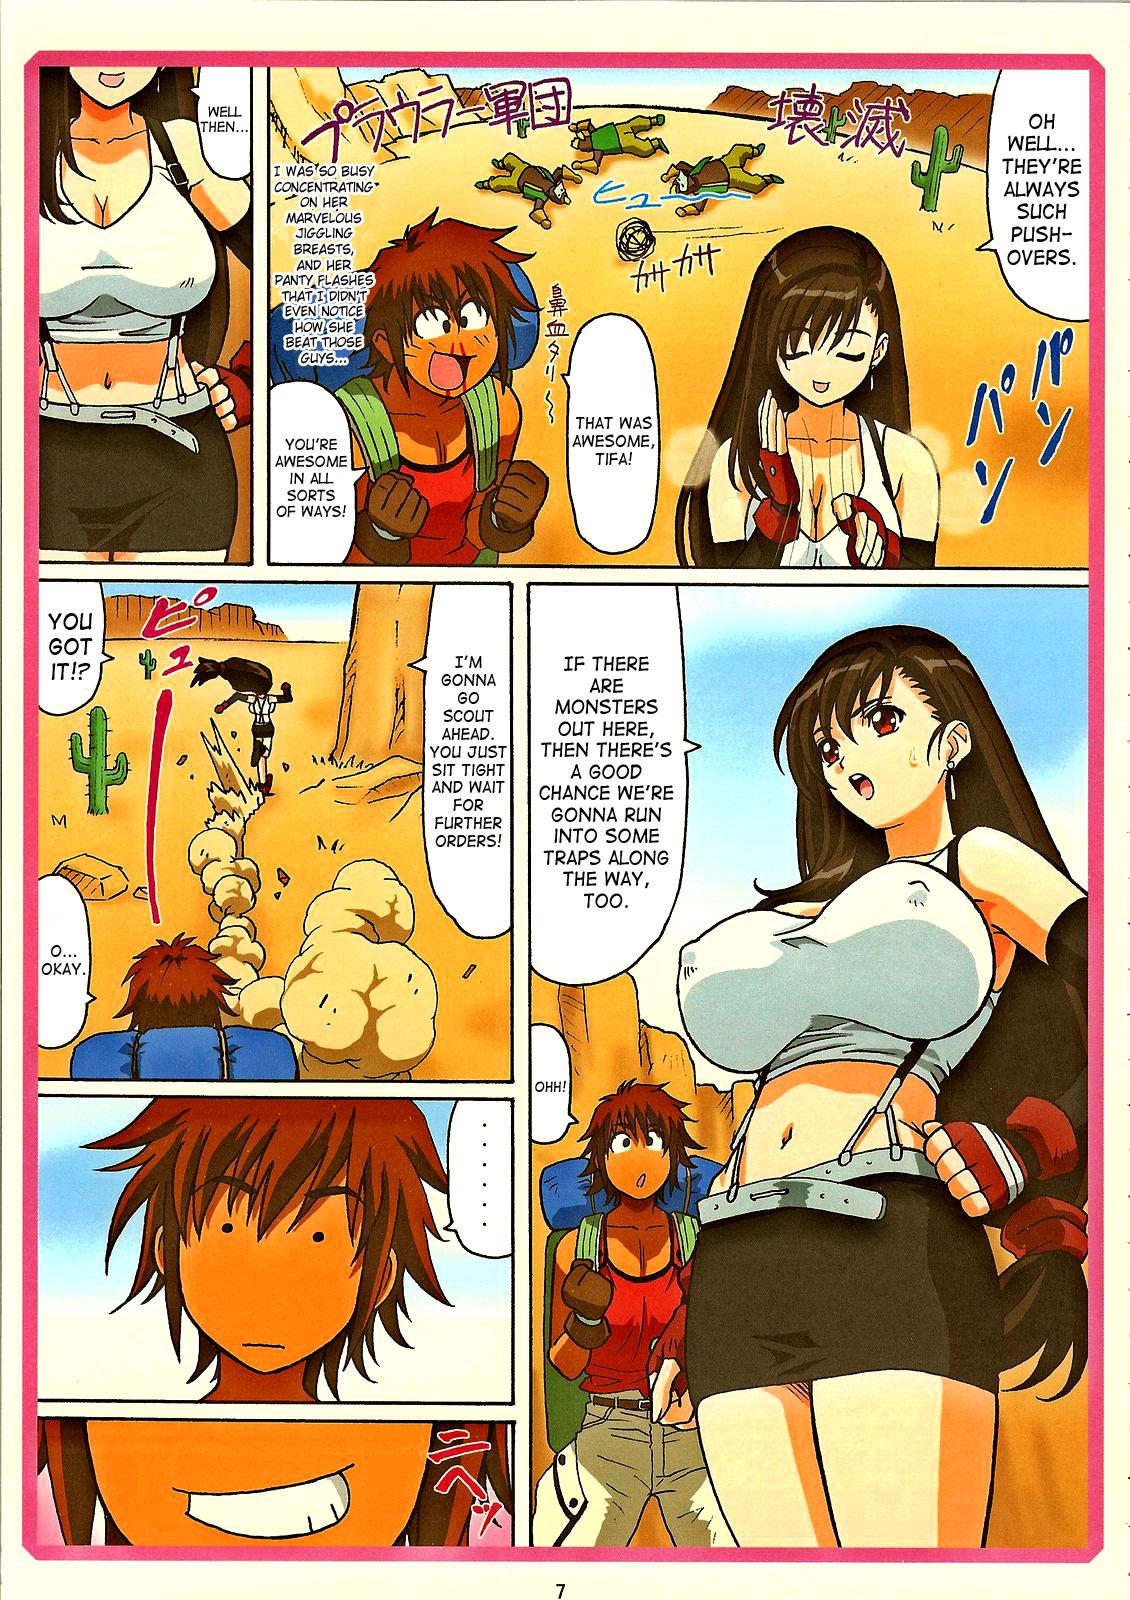 Dick Sucking Tifa W cup - Final fantasy vii Casting - Page 6